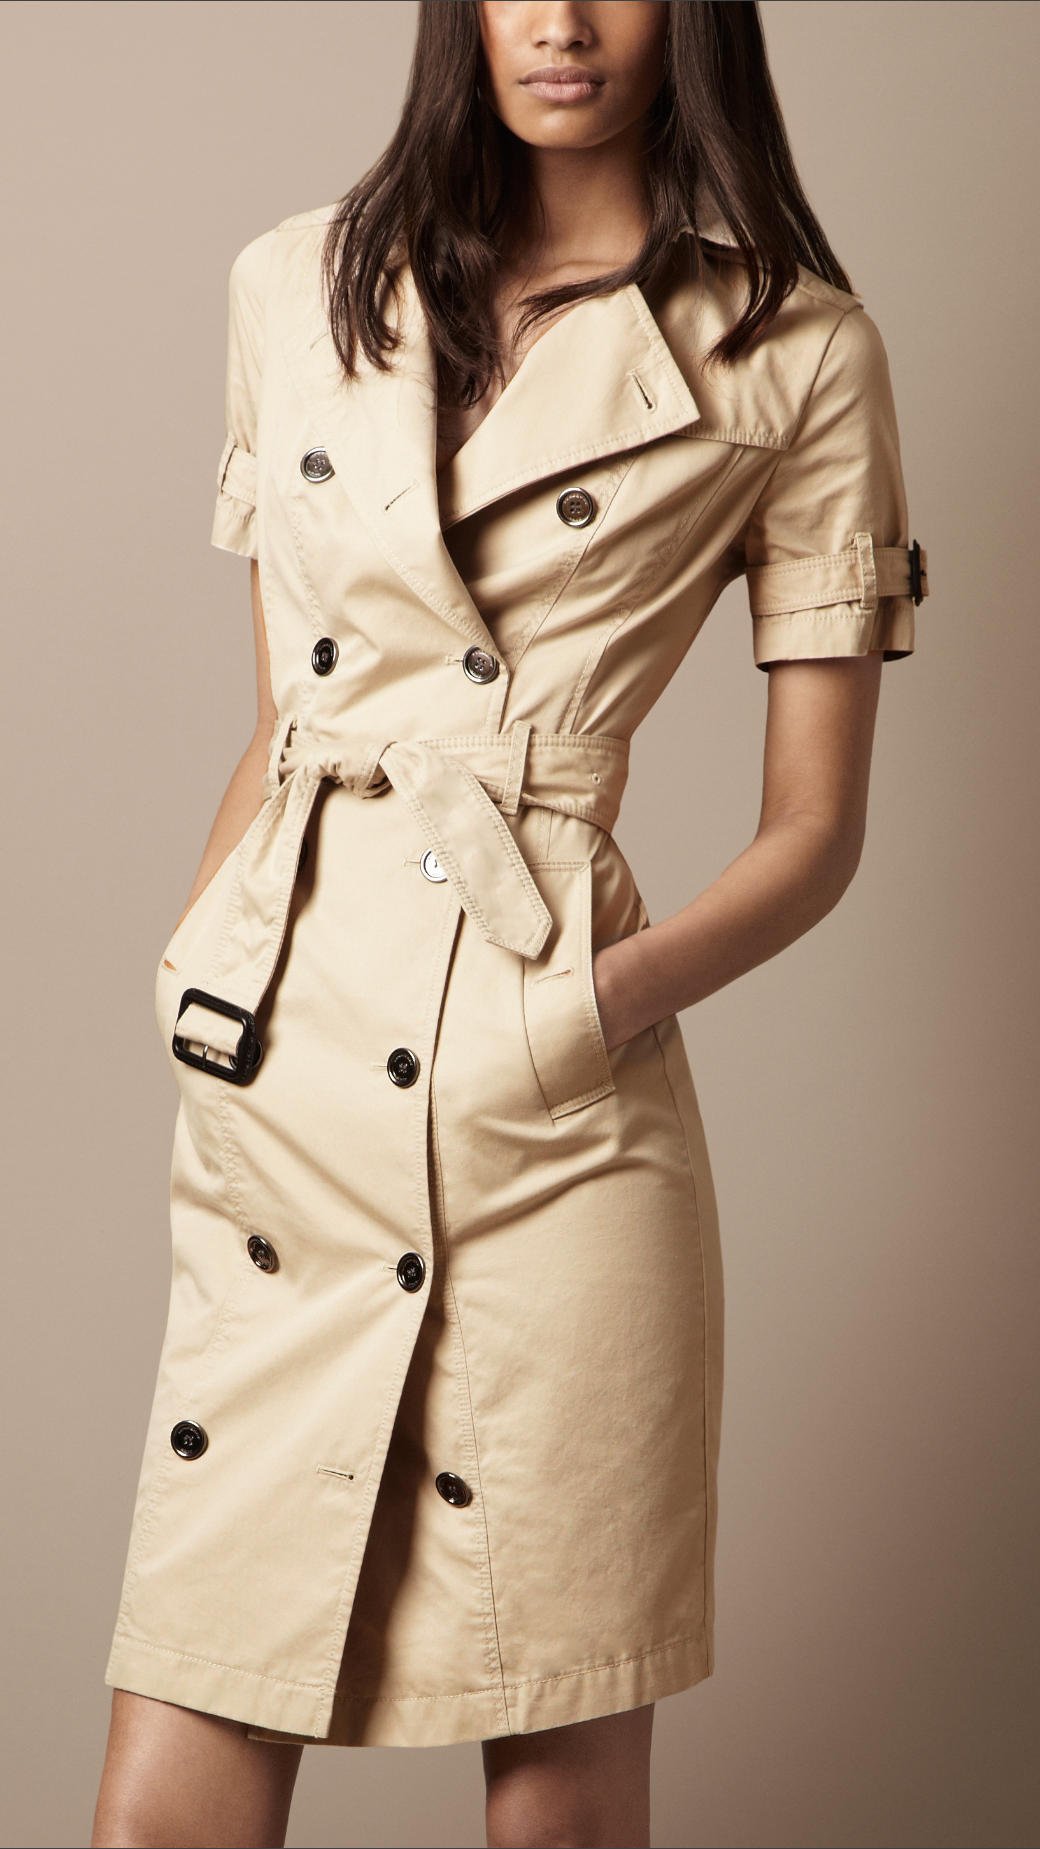 Burberry Brit Cotton Gabardine Trench Dress in Natural - Lyst